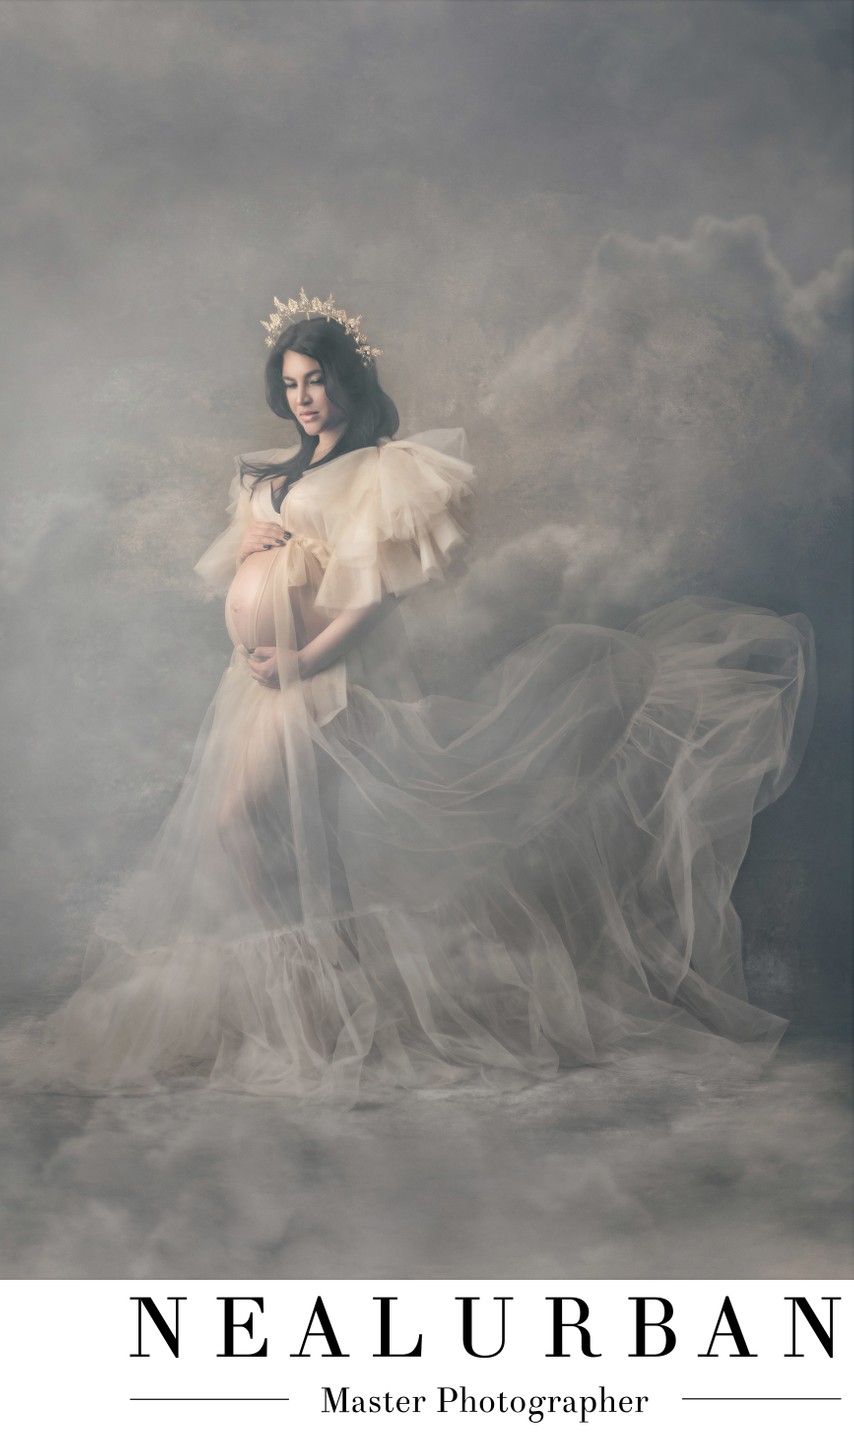 Maternity in the Clouds